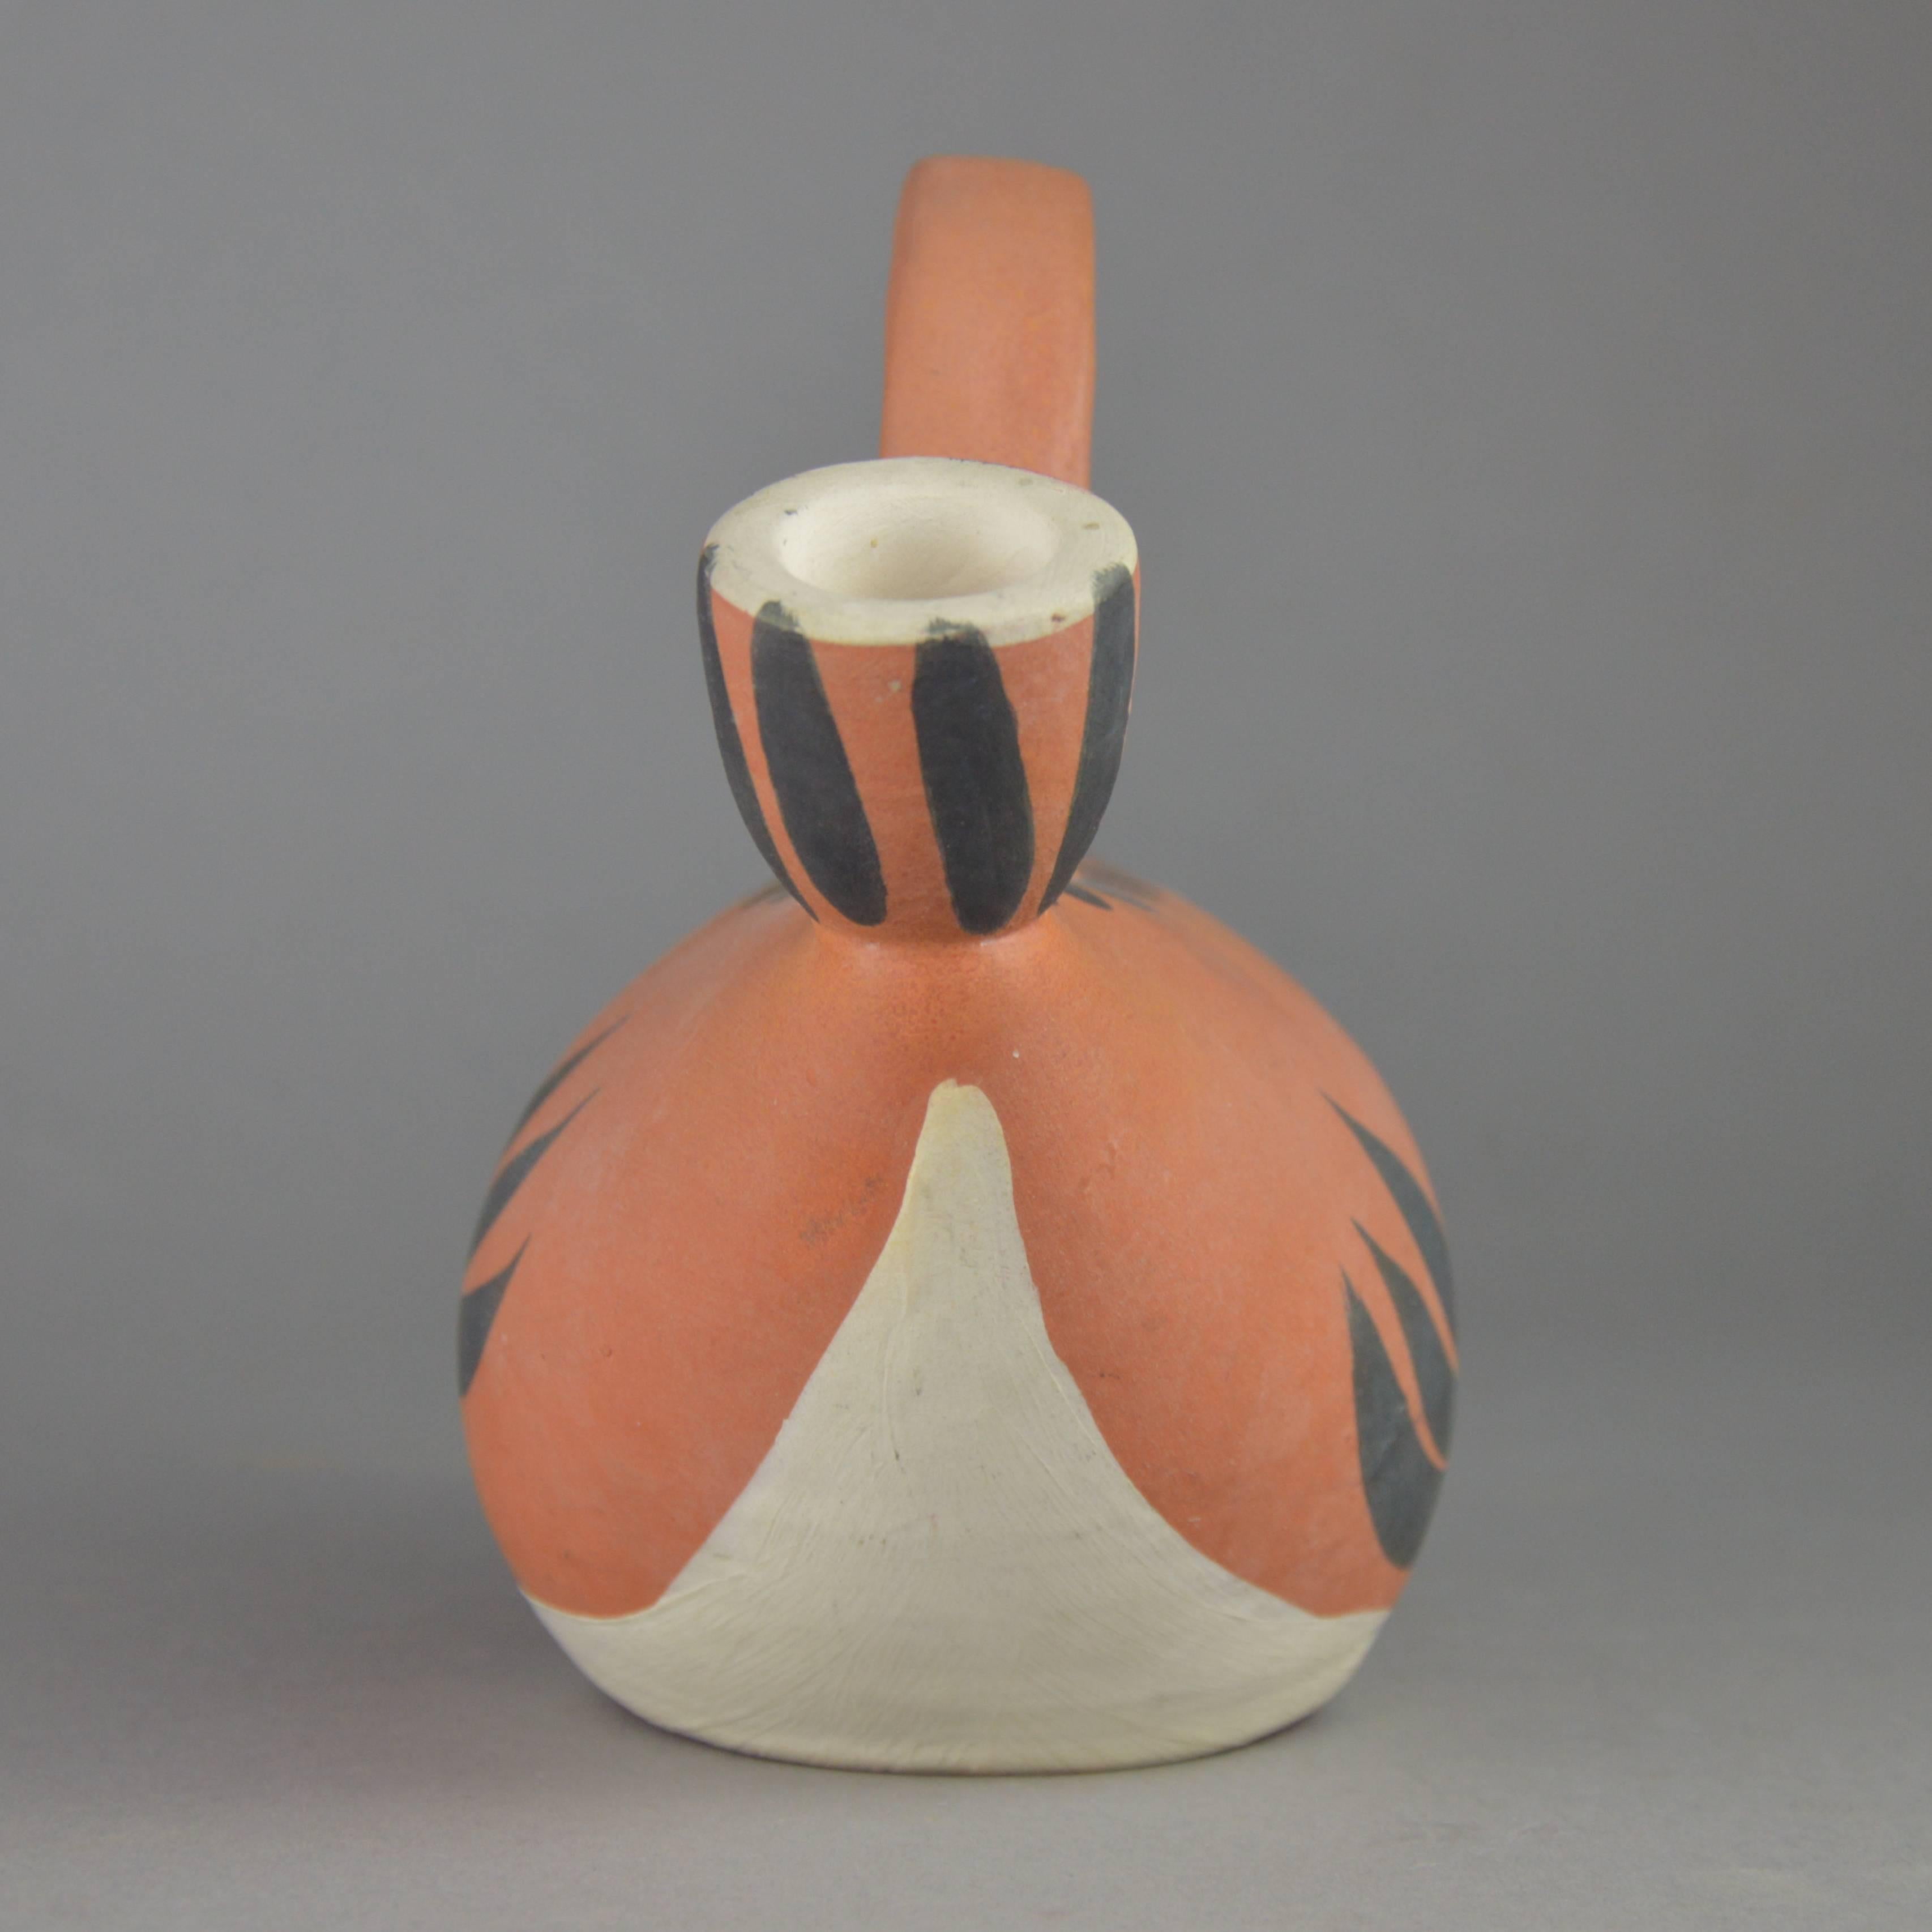 French Pablo Picasso Madoura Ceramic Turned Pitcher, Fish, 1952